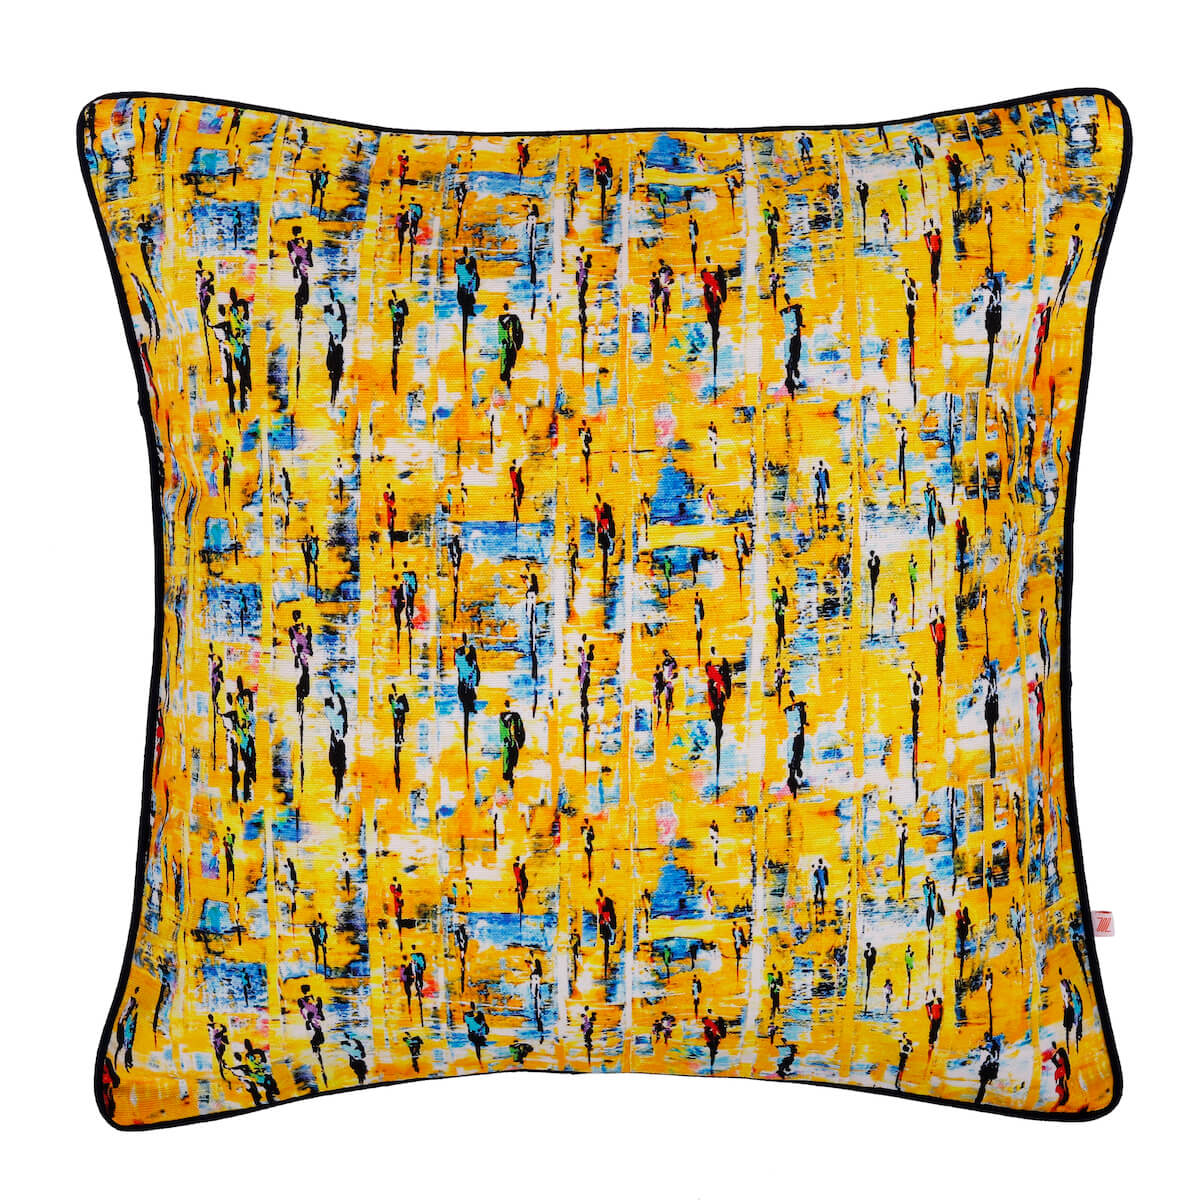 Abstract Bright Yellow Digital Printed Cotton Canvas Size 16"x16"